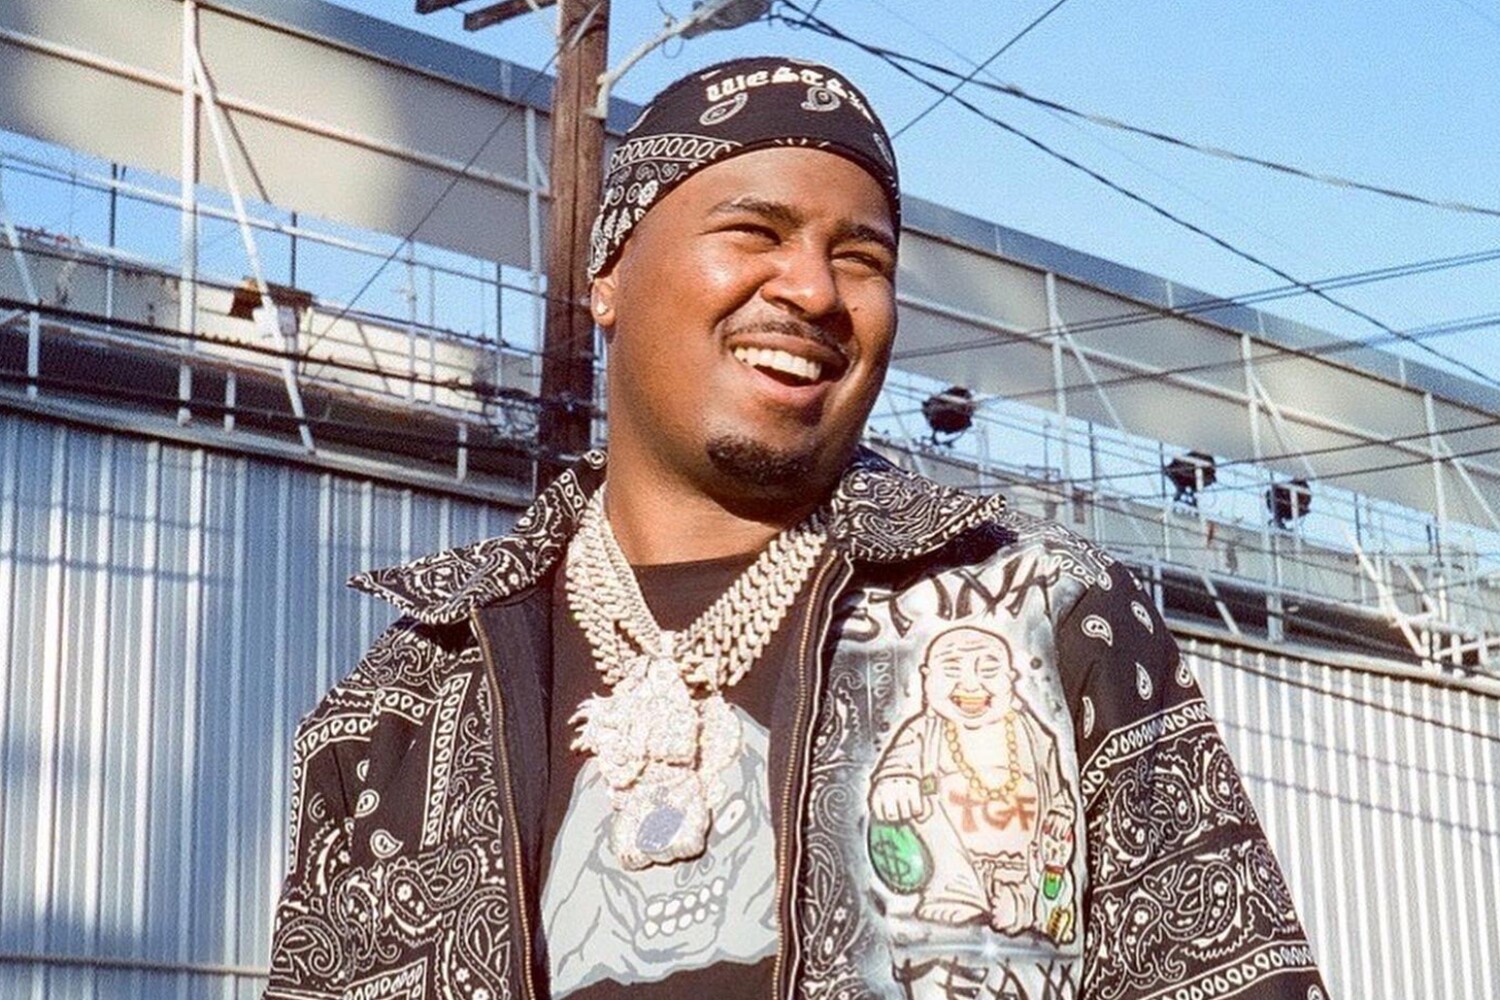 'He deserved so much better': L.A.'s hip-hop community mourns the loss of Drakeo the Ruler